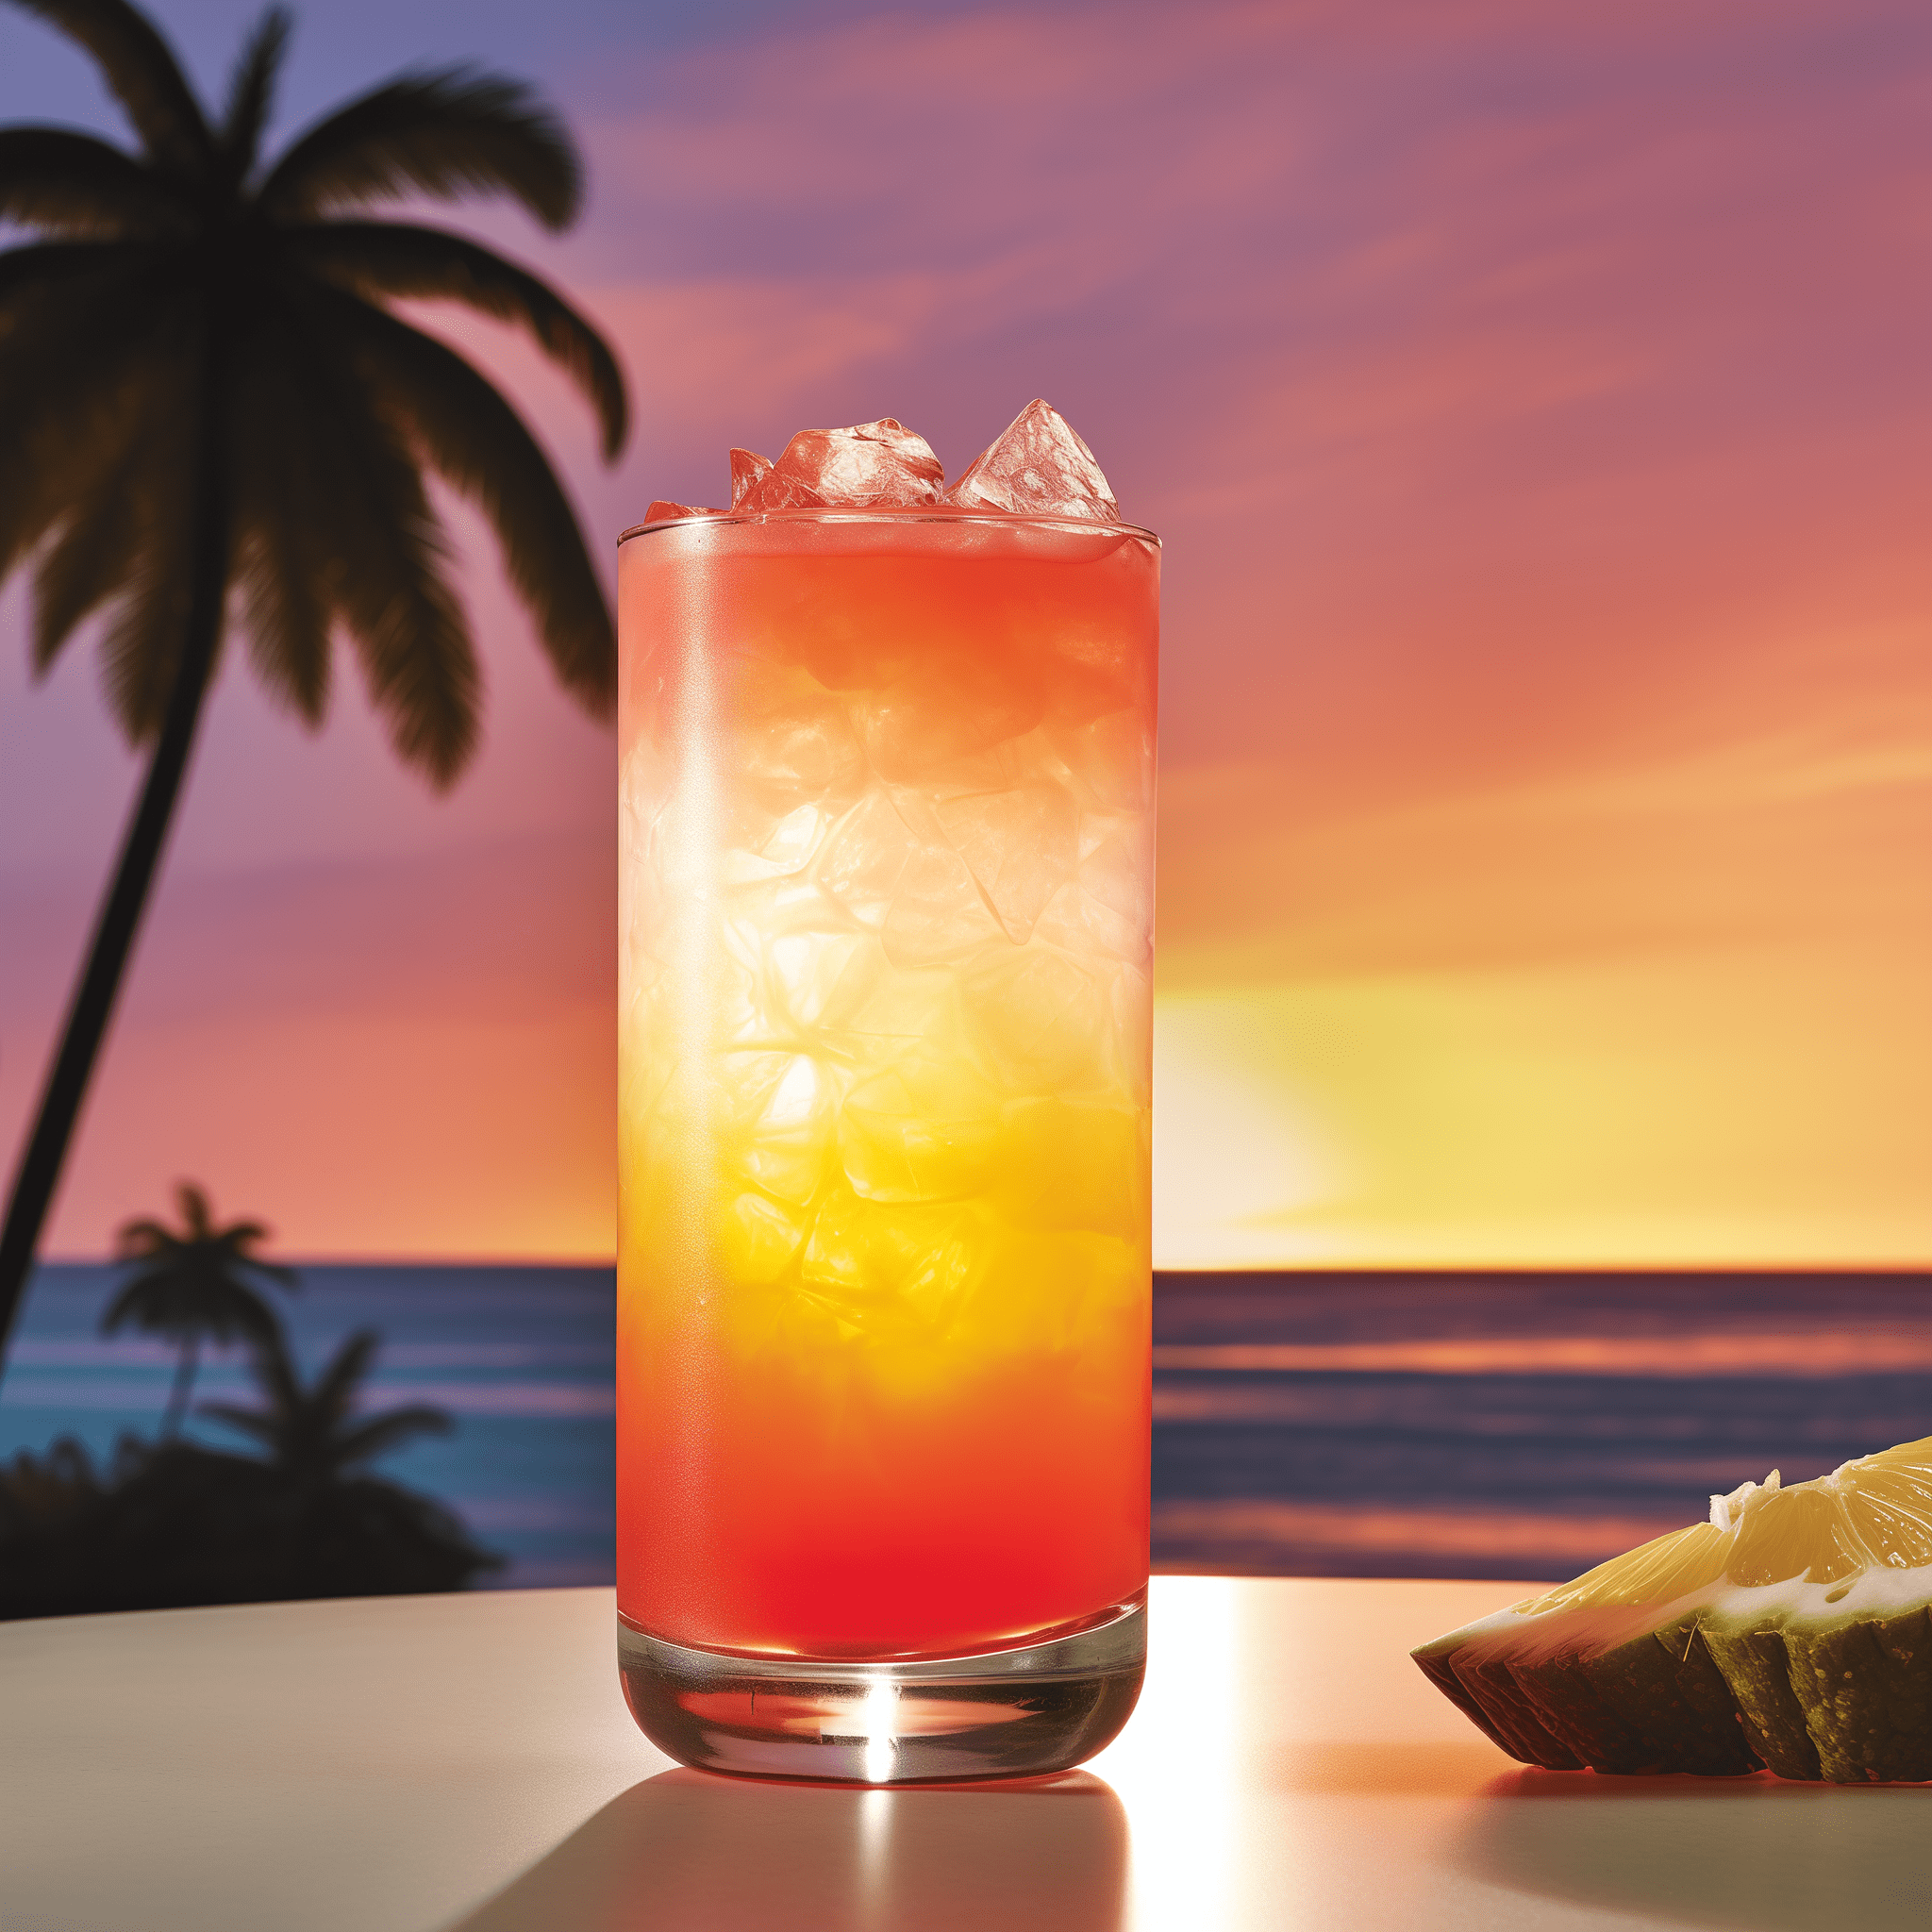 Summer Passion Cocktail Recipe - The Summer Passion is a delightful blend of sweet and tangy flavors, with the pineapple juice providing a tropical kick and the strawberry and passion fruit liqueurs adding a luscious sweetness. The Sprite adds a fizzy lightness, making the drink both invigorating and easy to sip.